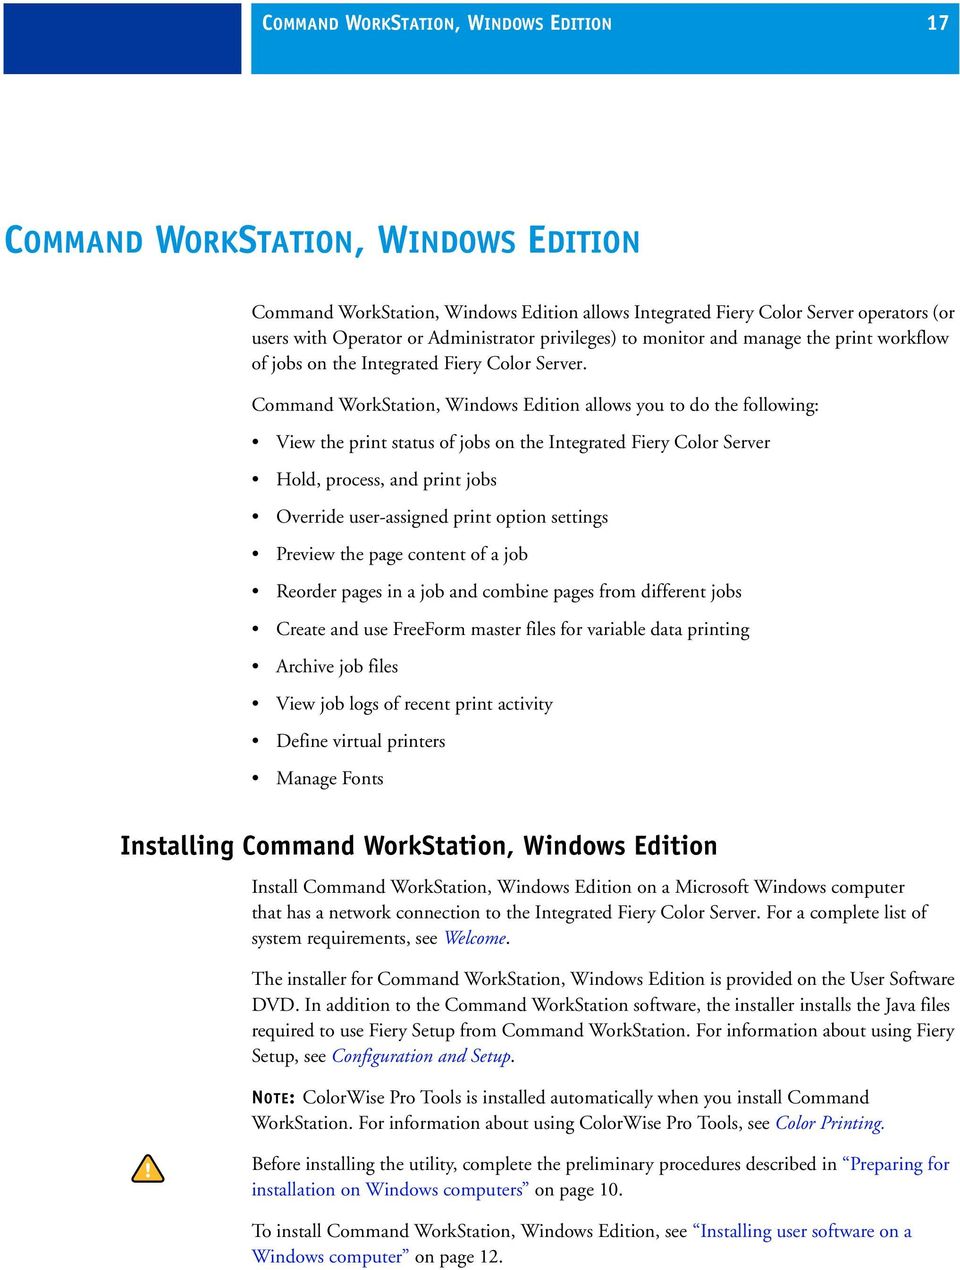 Command WorkStation, Windows Edition allows you to do the following: View the print status of jobs on the Integrated Fiery Color Server Hold, process, and print jobs Override user-assigned print